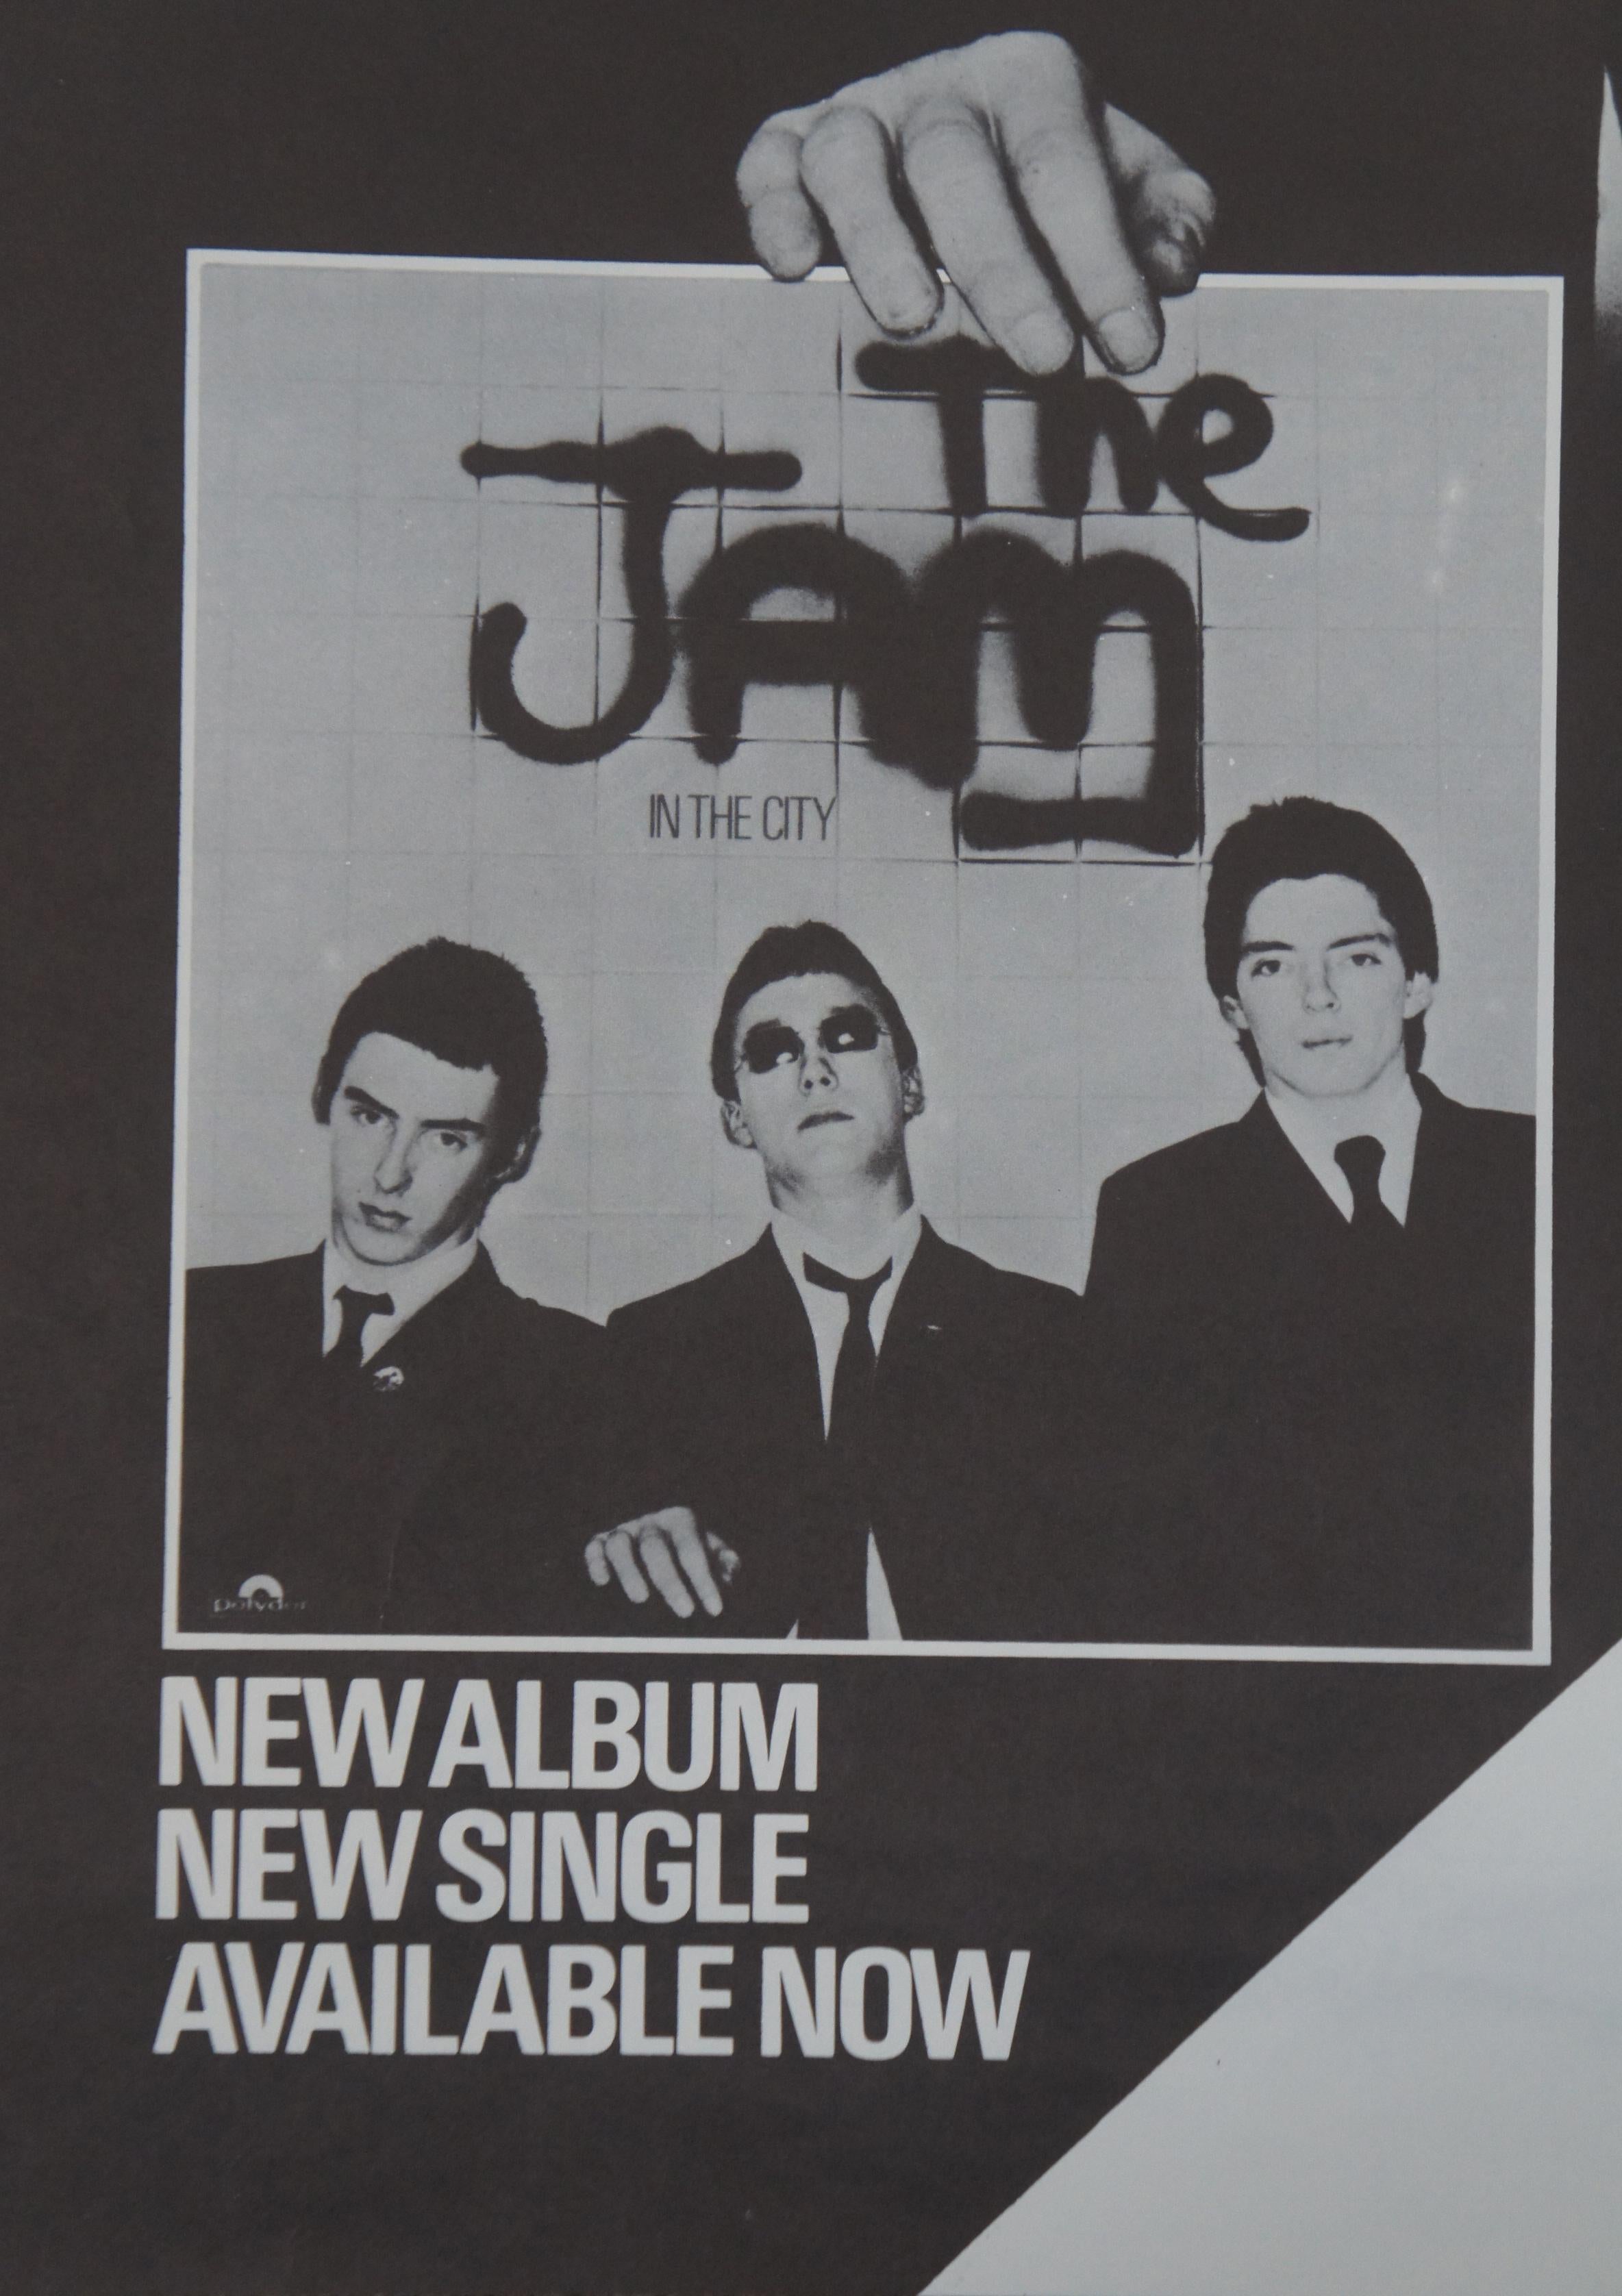 Paper Original 1977 The Jam in the City Poster Punk New Wave Mod